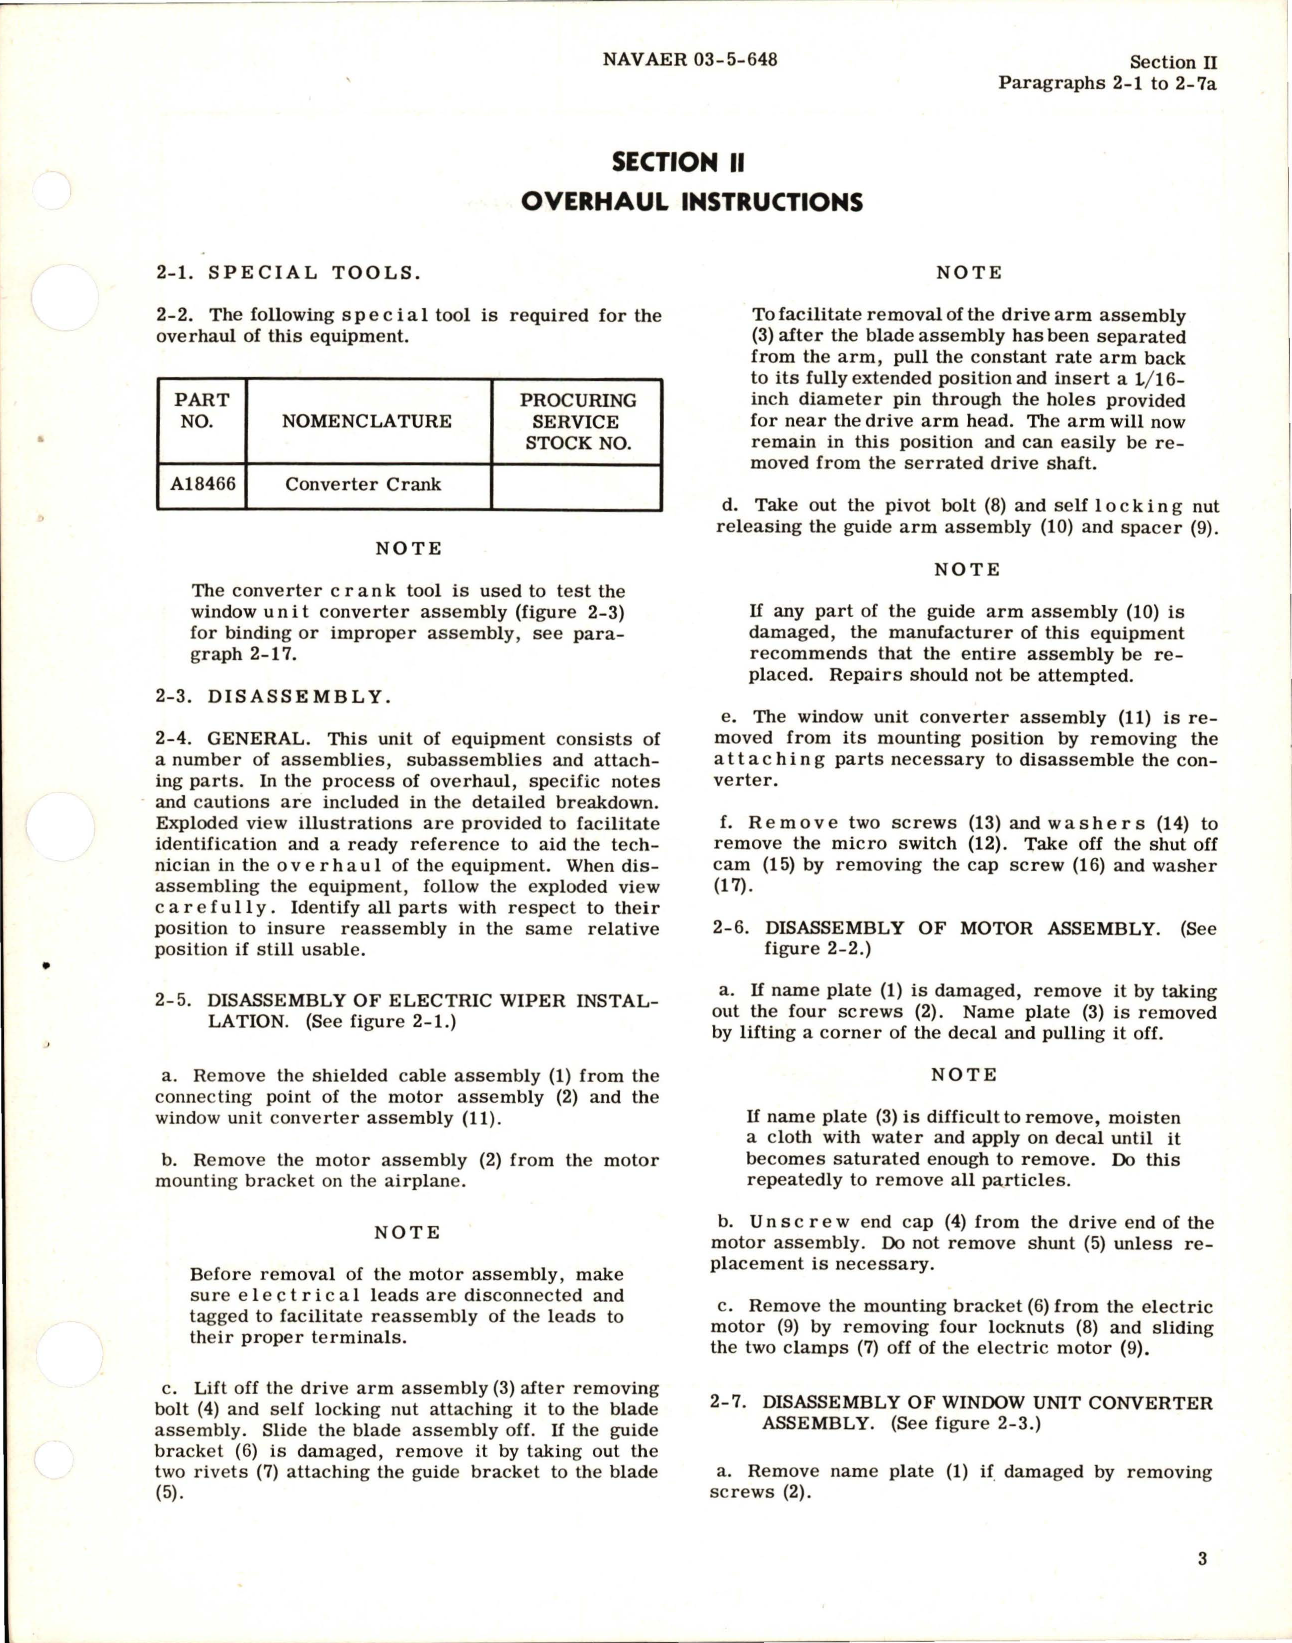 Sample page 7 from AirCorps Library document: Overhaul Instructions for Electric Wiper Installation - Model K18582E 